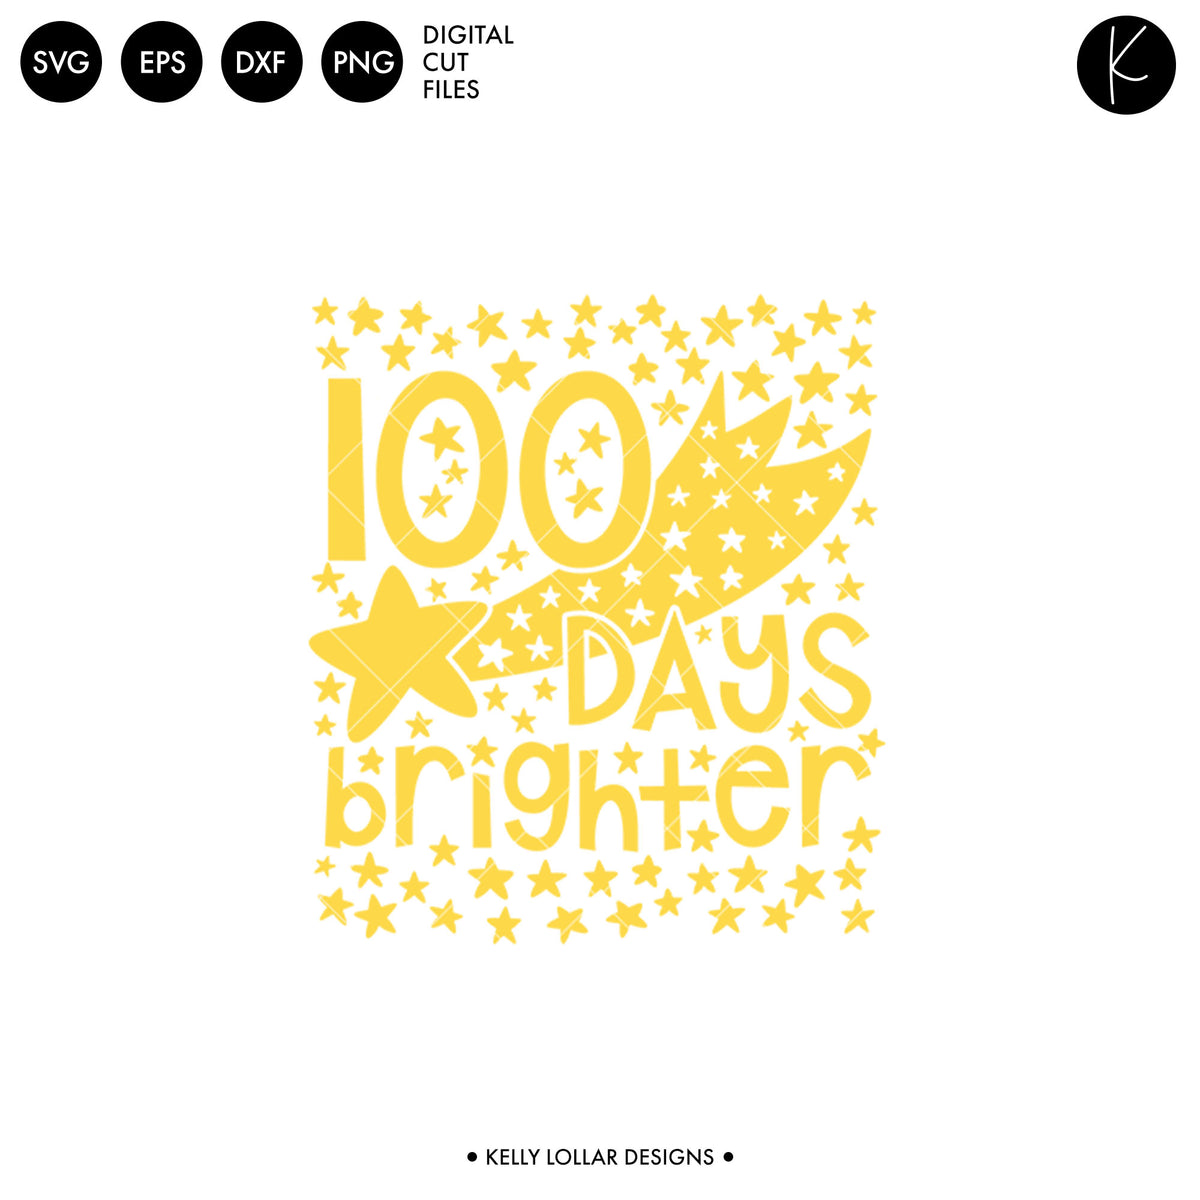 100 Days Brighter Stars | SVG DXF EPS PNG Cut Files